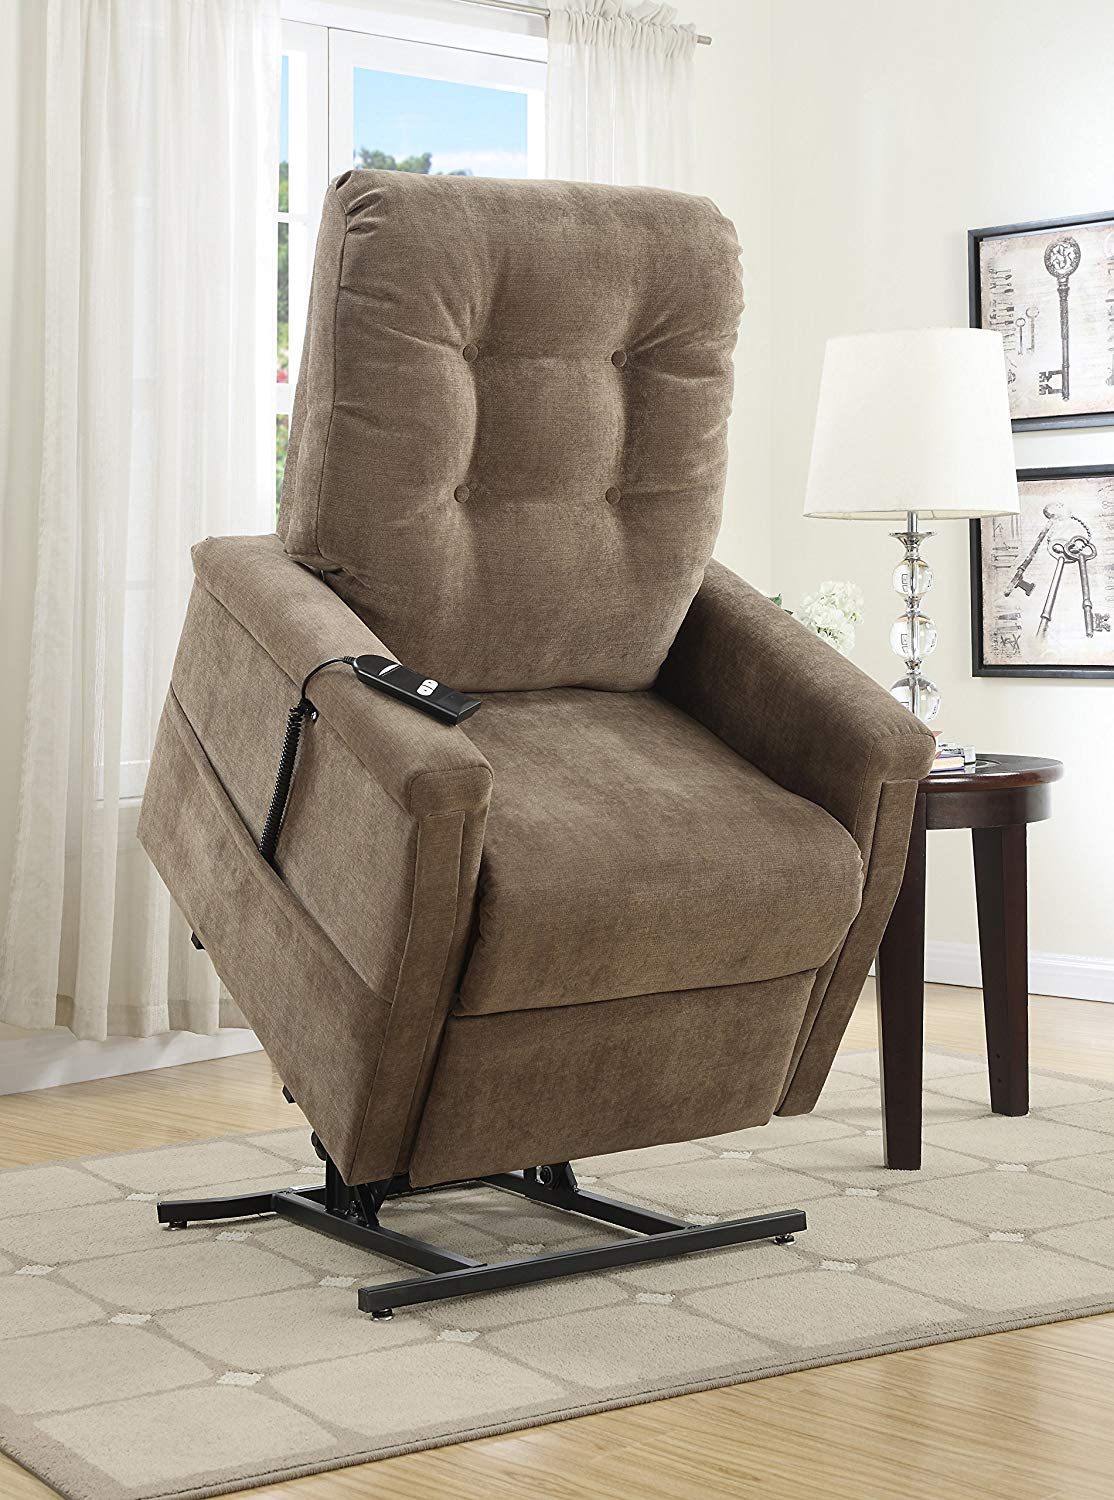 Top 10 Reclining Chairs for Elderly - 2020 Reviews & Guide • Recliners